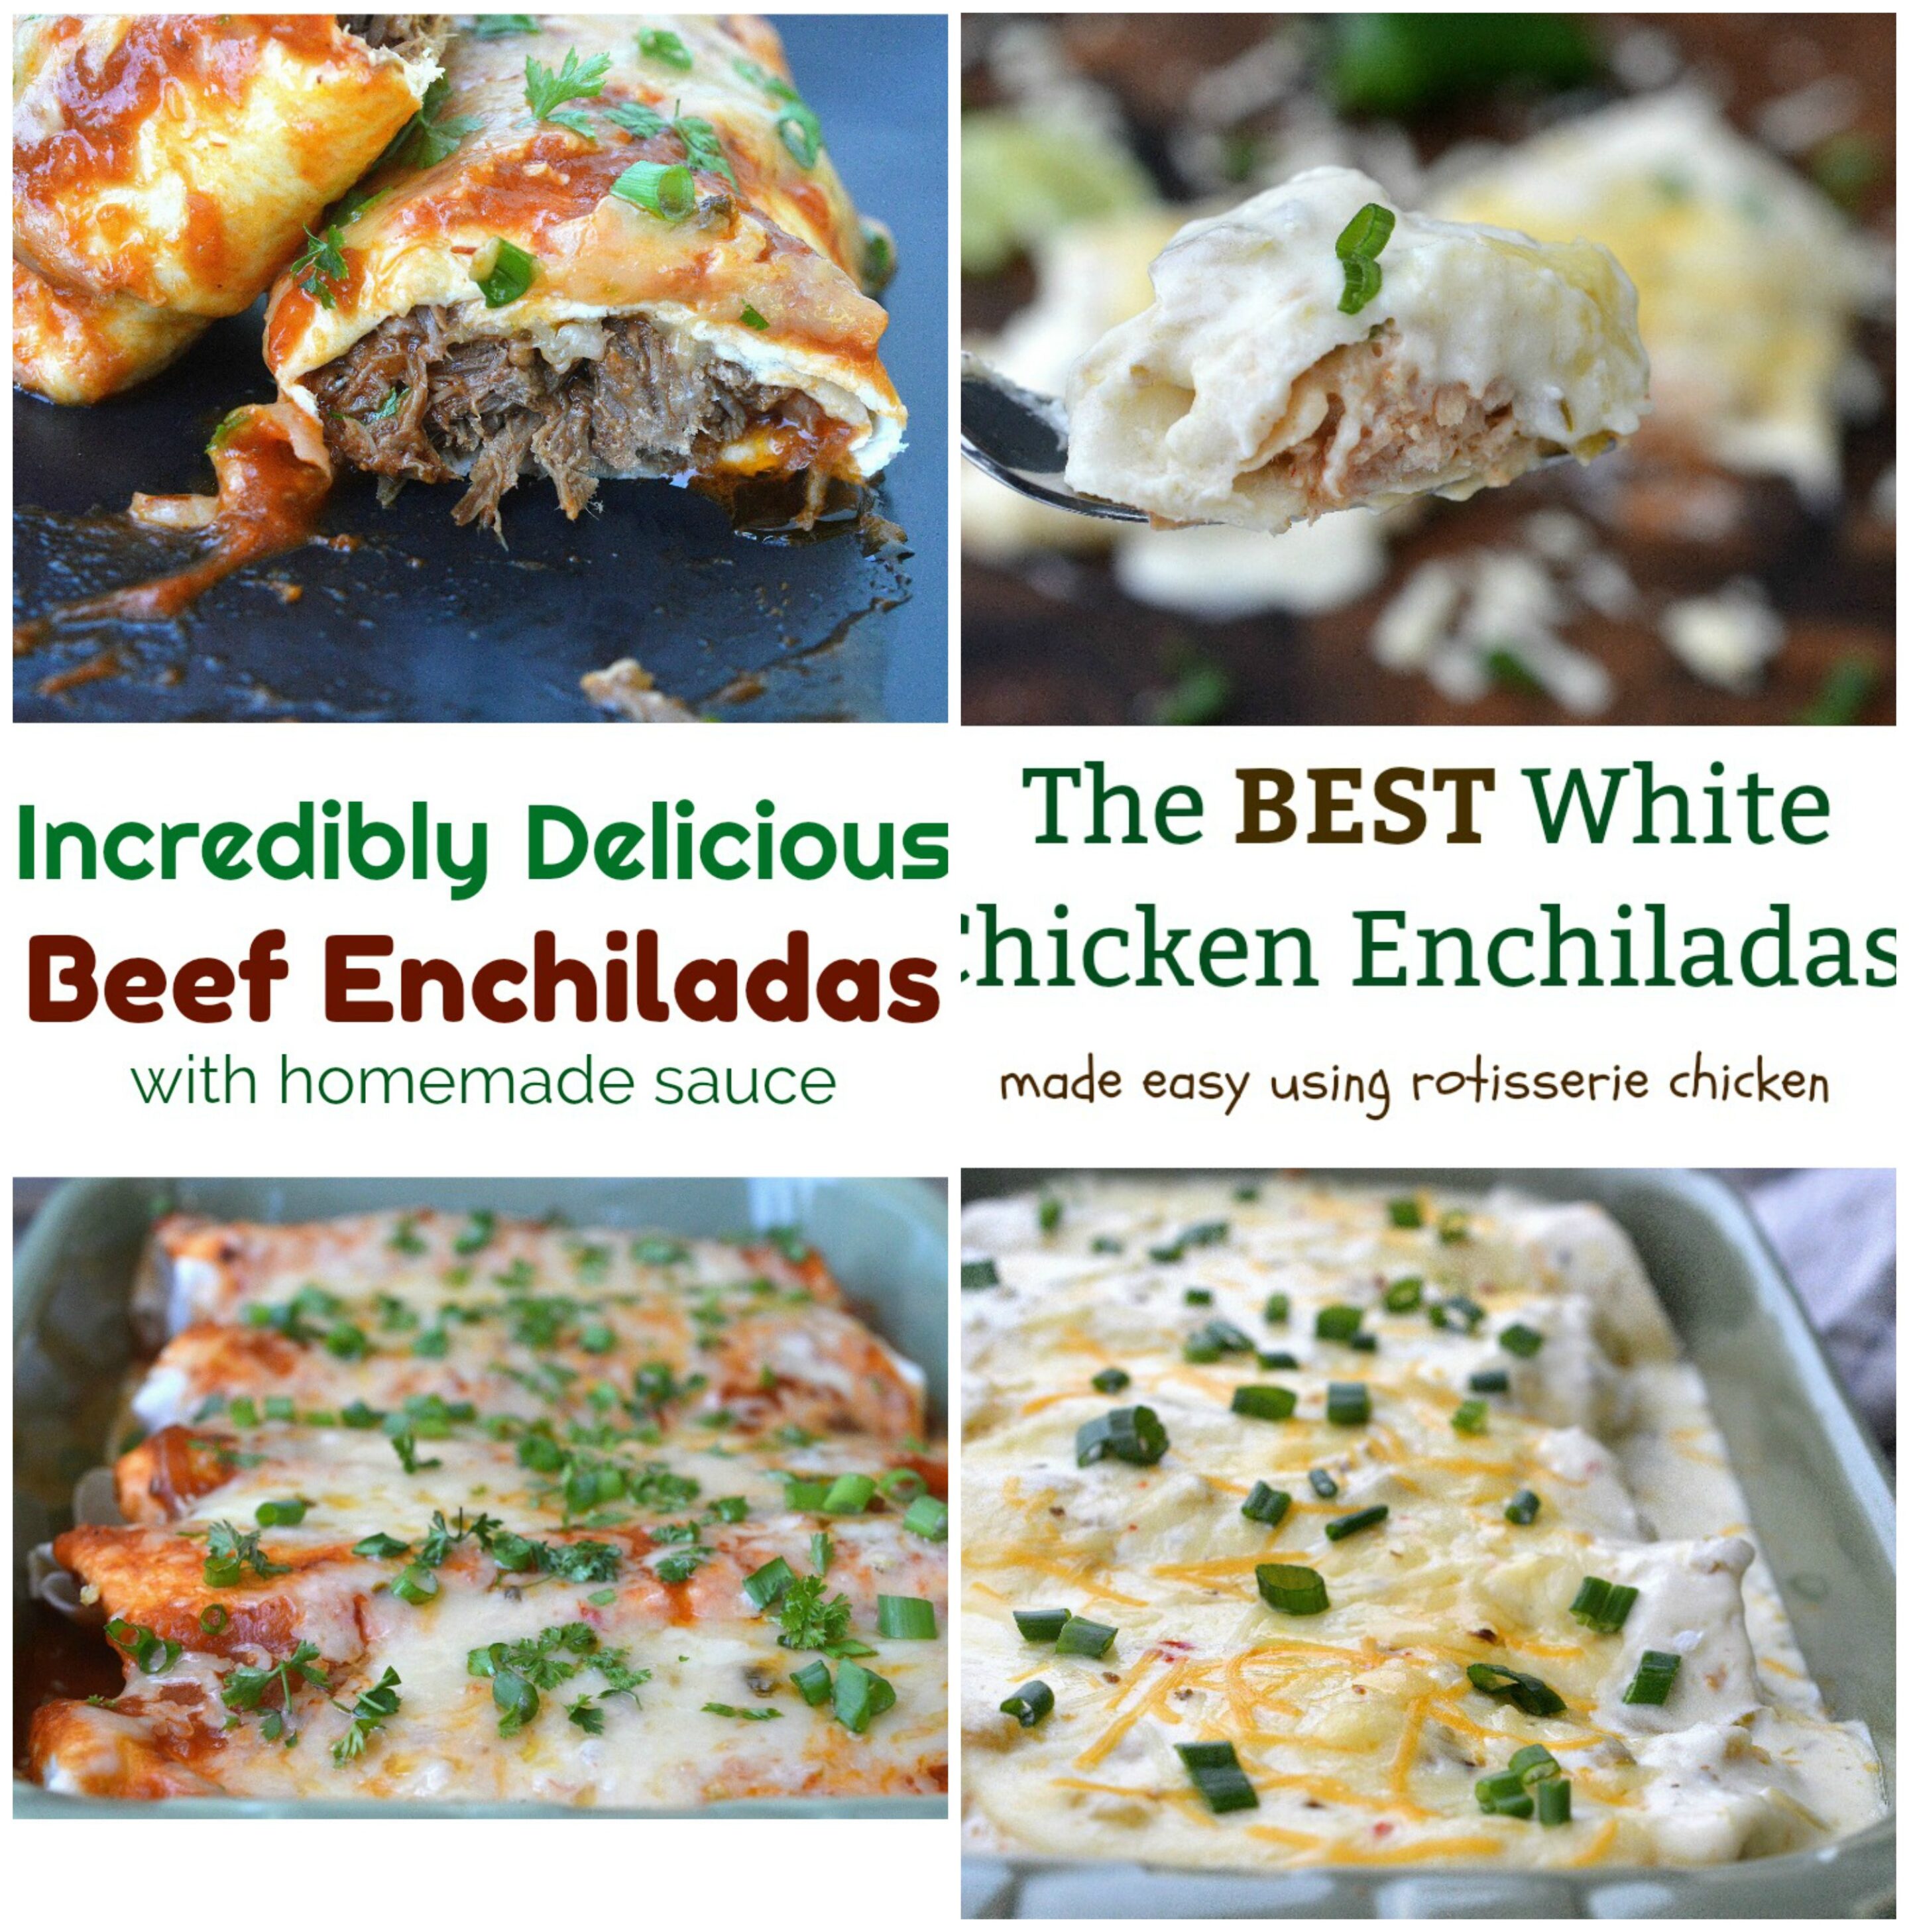 Beef enchiladas and Chicken Enchilada Recipes to make at home!